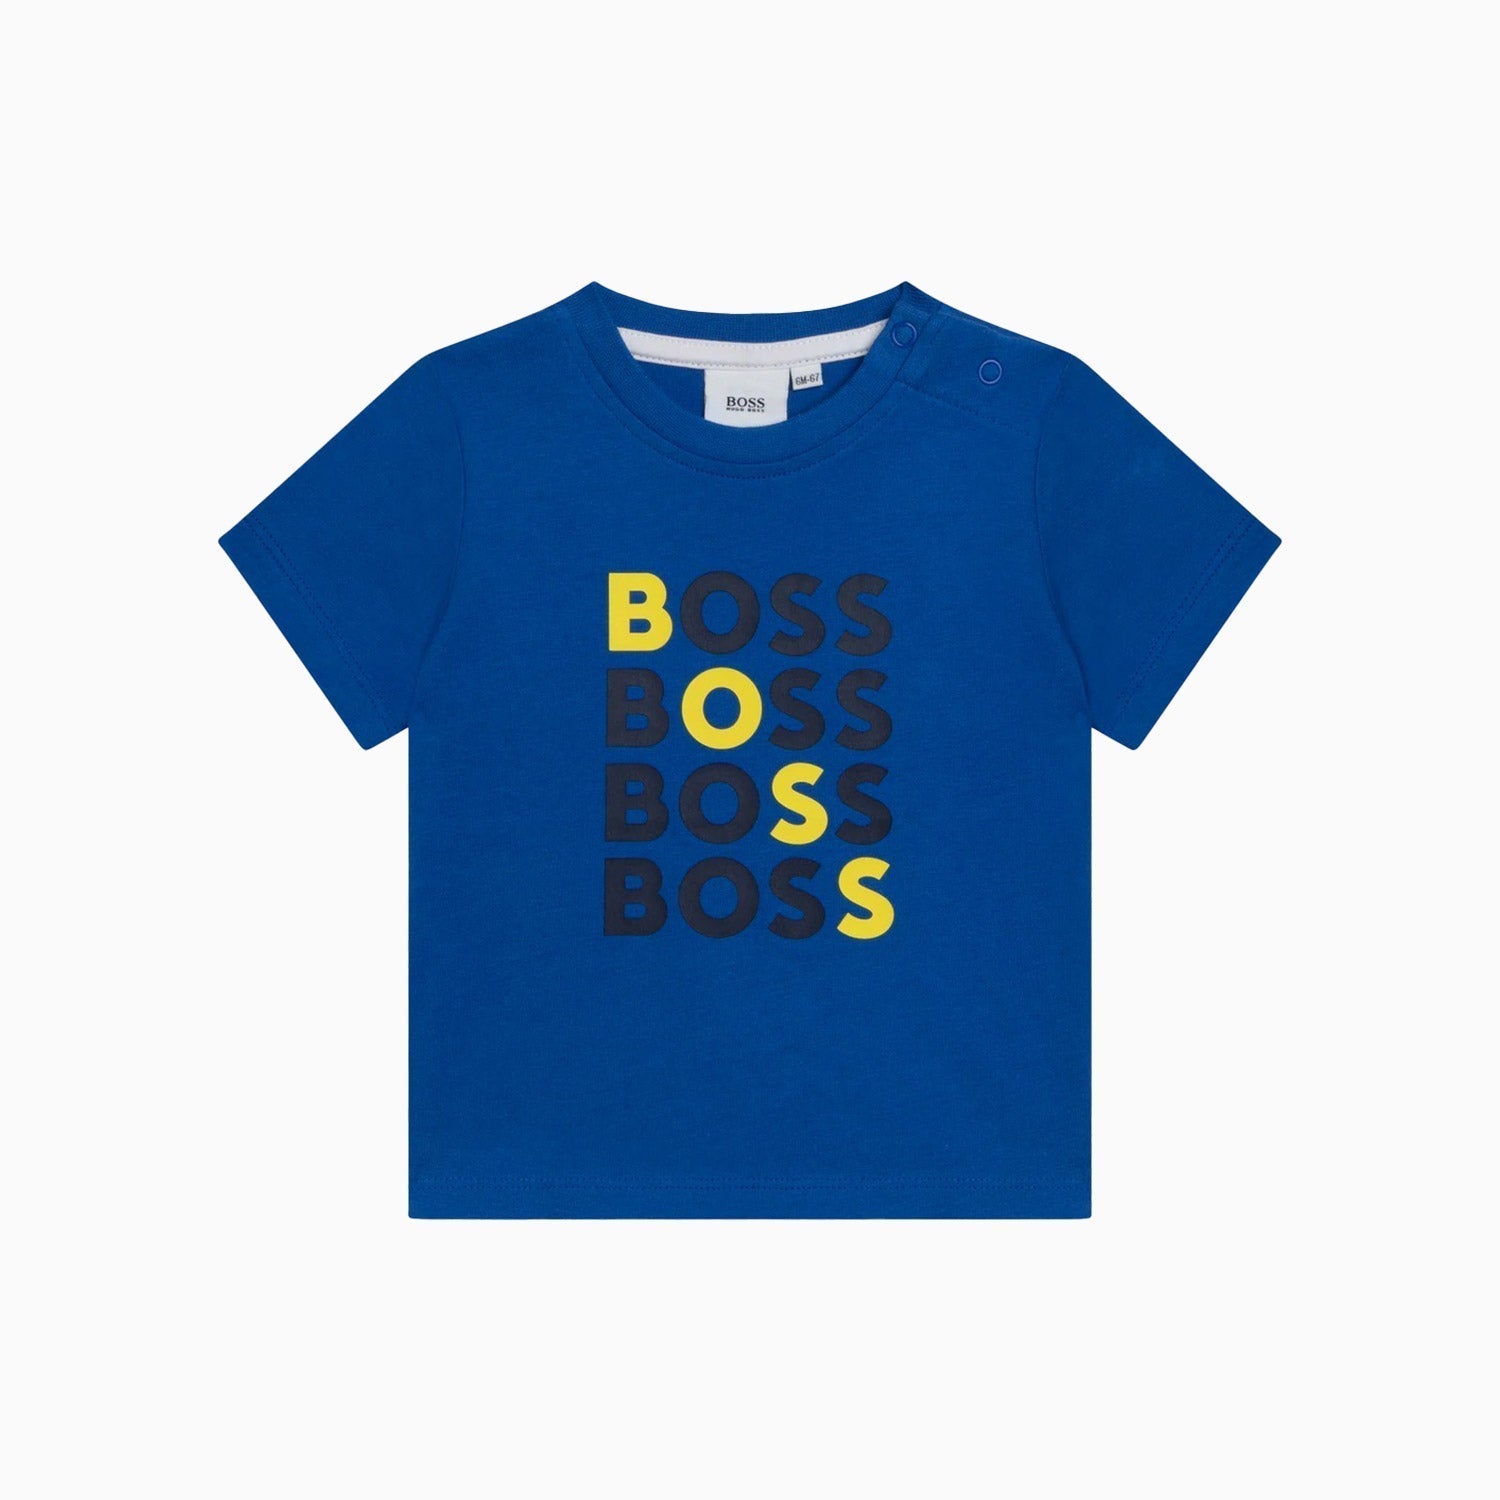 Hugo Boss Kid's T Shirt Toddlers - Color: Electric Blue - Kids Premium Clothing -